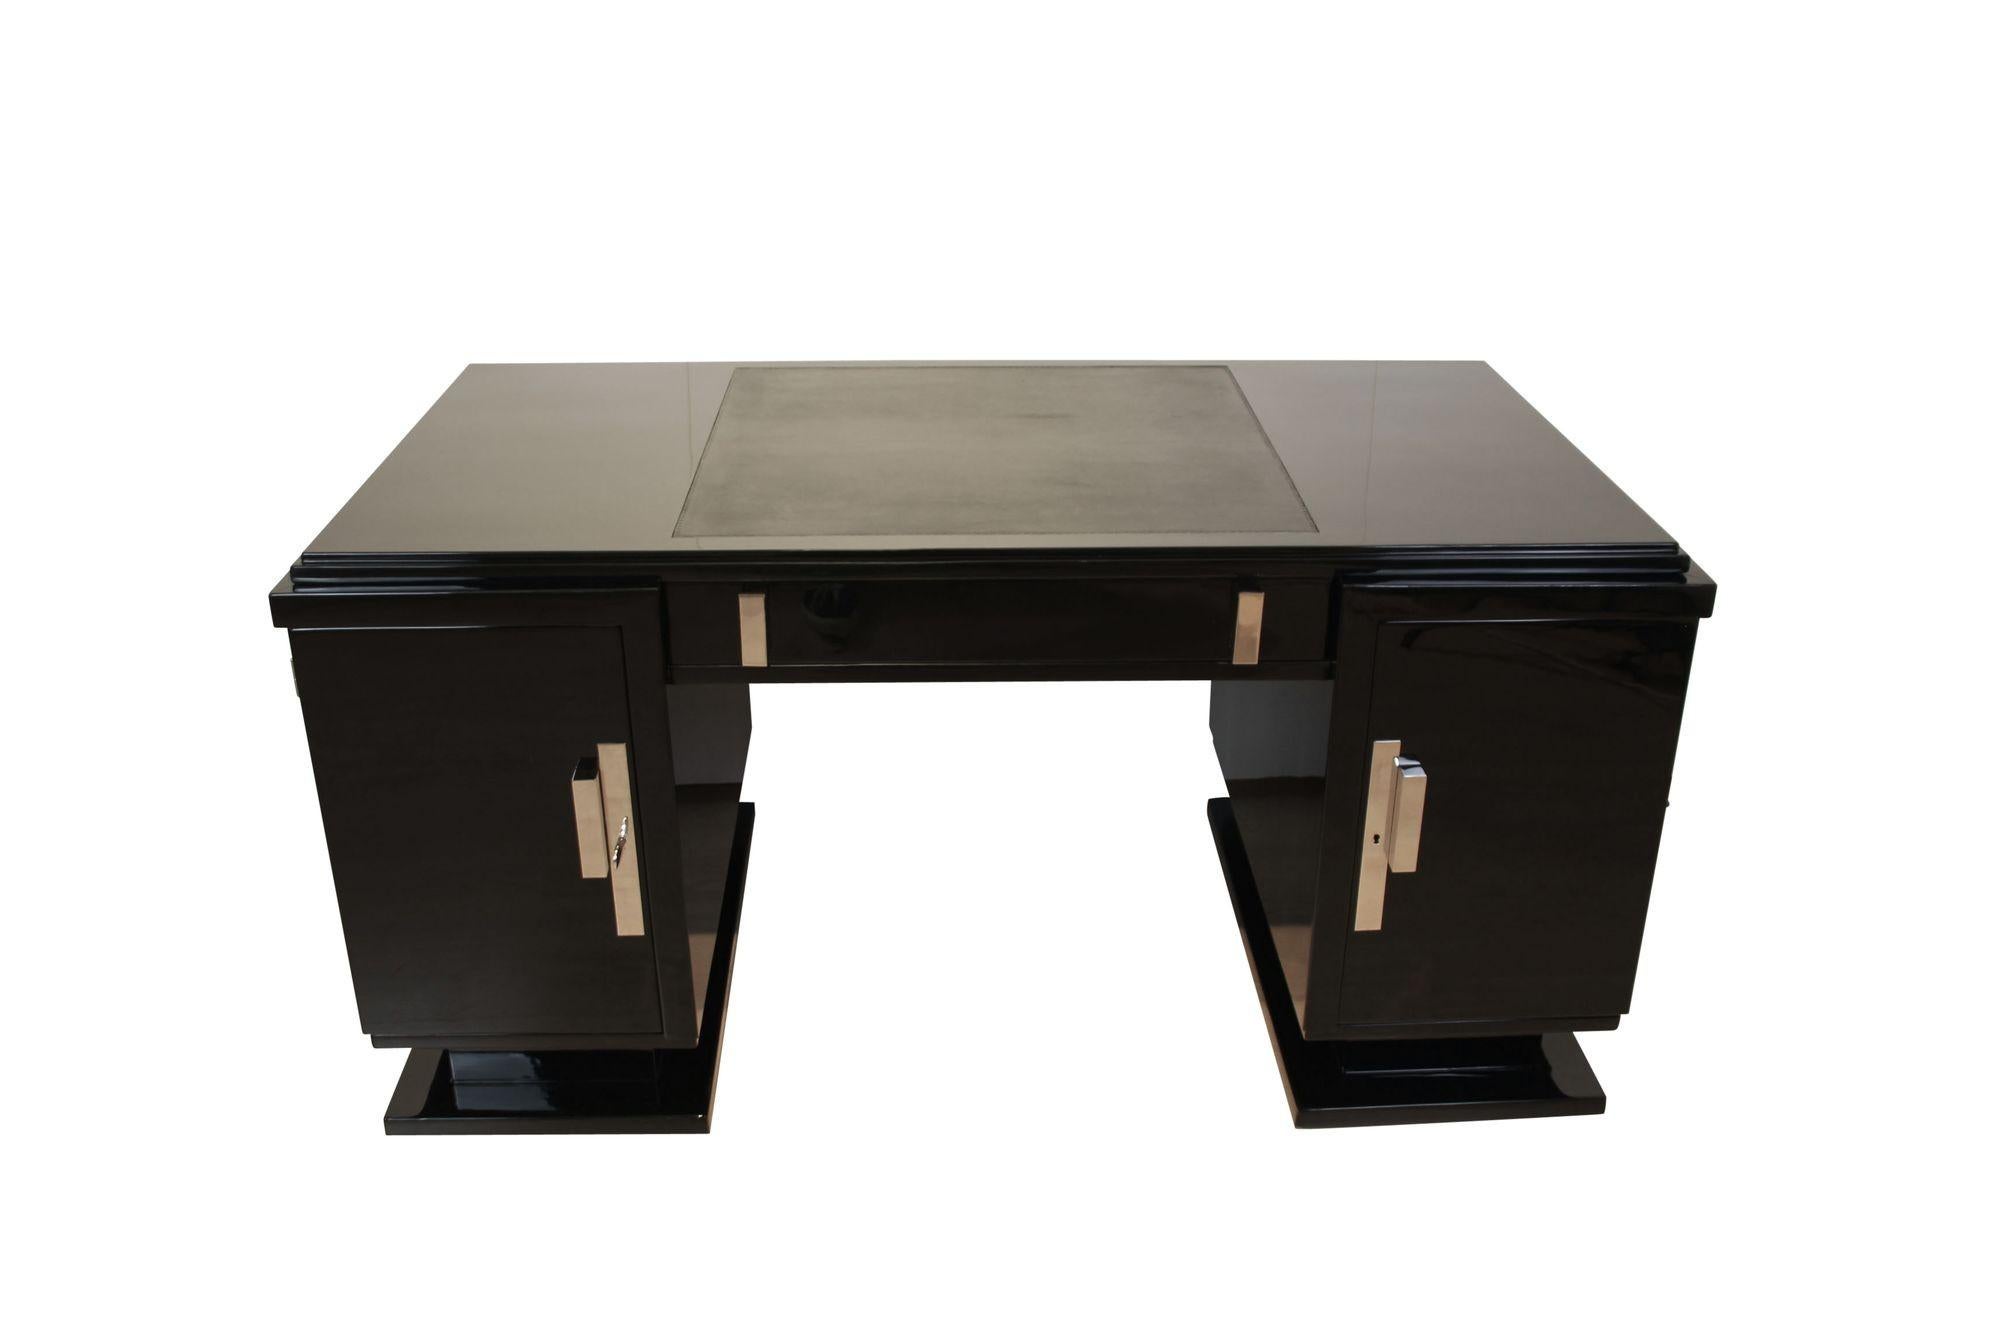 Elegant straightlined Art Deco Desk from France circa 1930.
Fully restored condition with black high-gloss piano lacquer finish.
Original, newly nickel-plated bronze handles. Original embossed leather plate dyed in black. Original lock, working. One